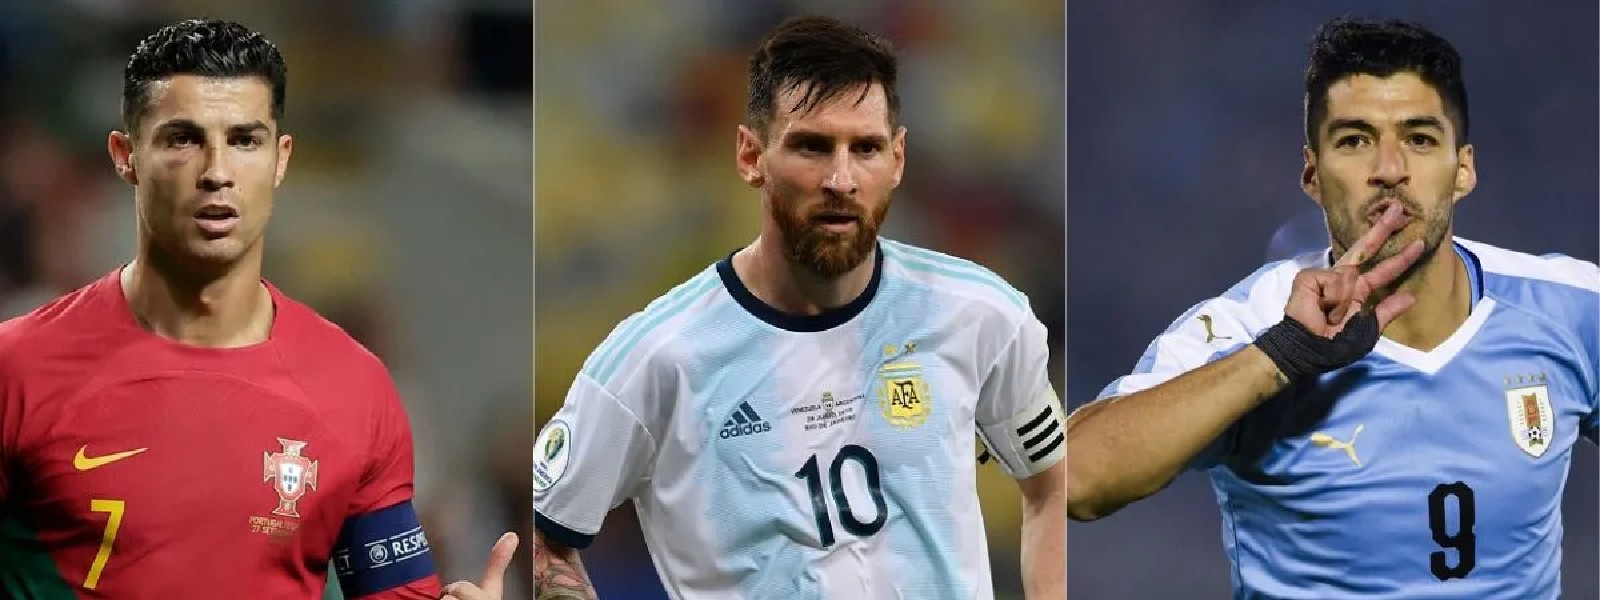 Football stars likely playing in last FIFA WC